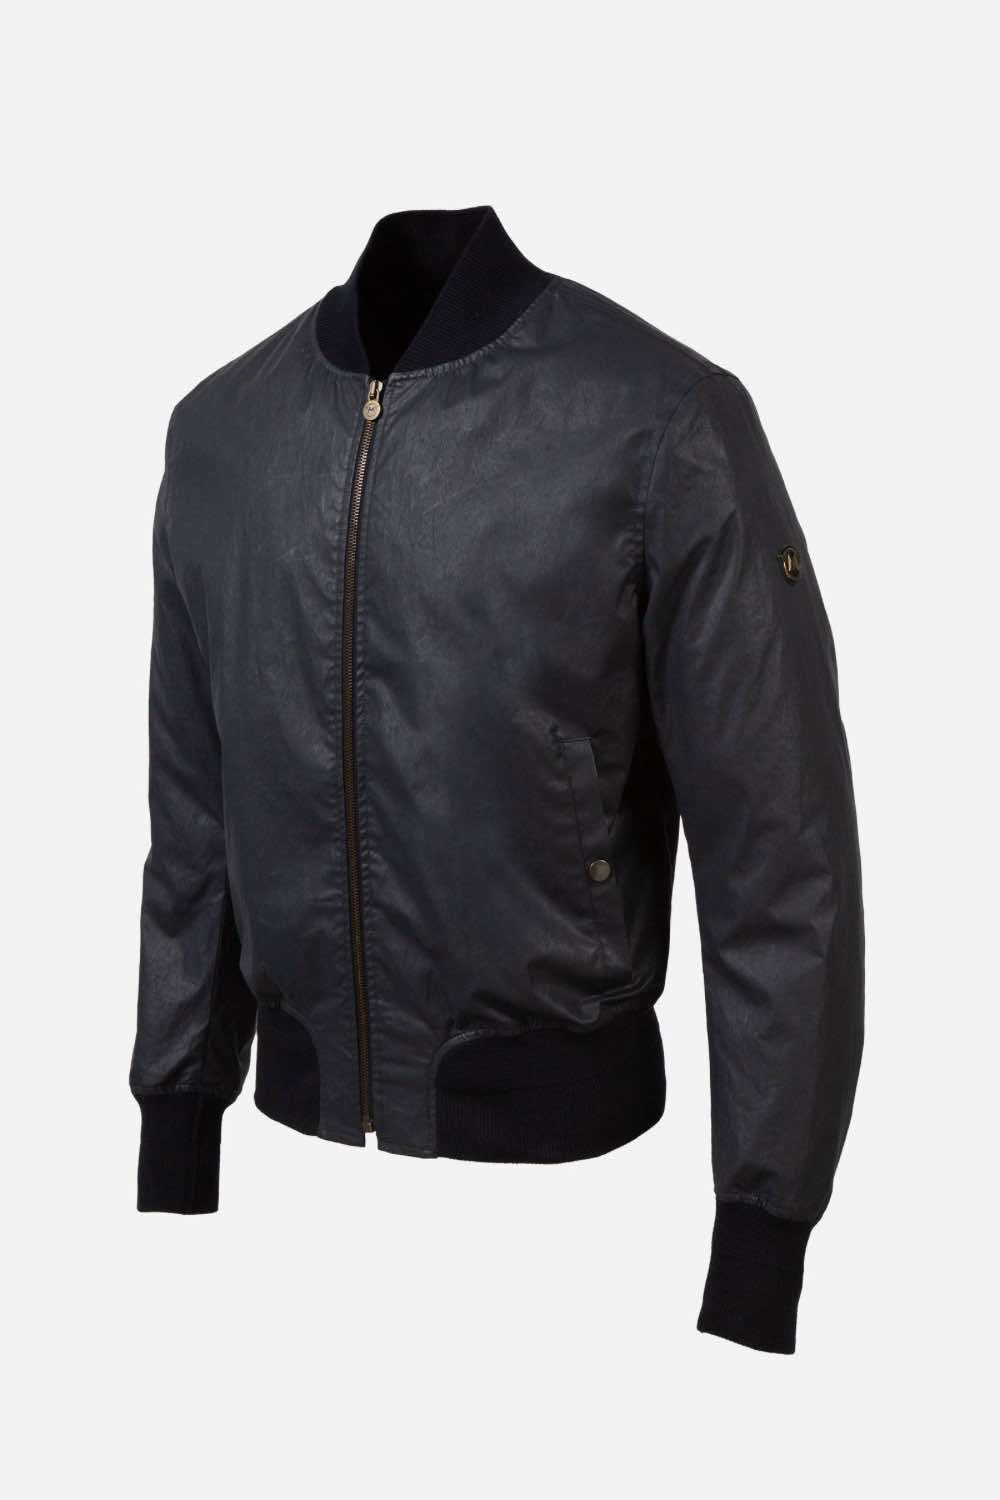 Matchless Ian Men's Leather Bomber Jacket Navy - Side View